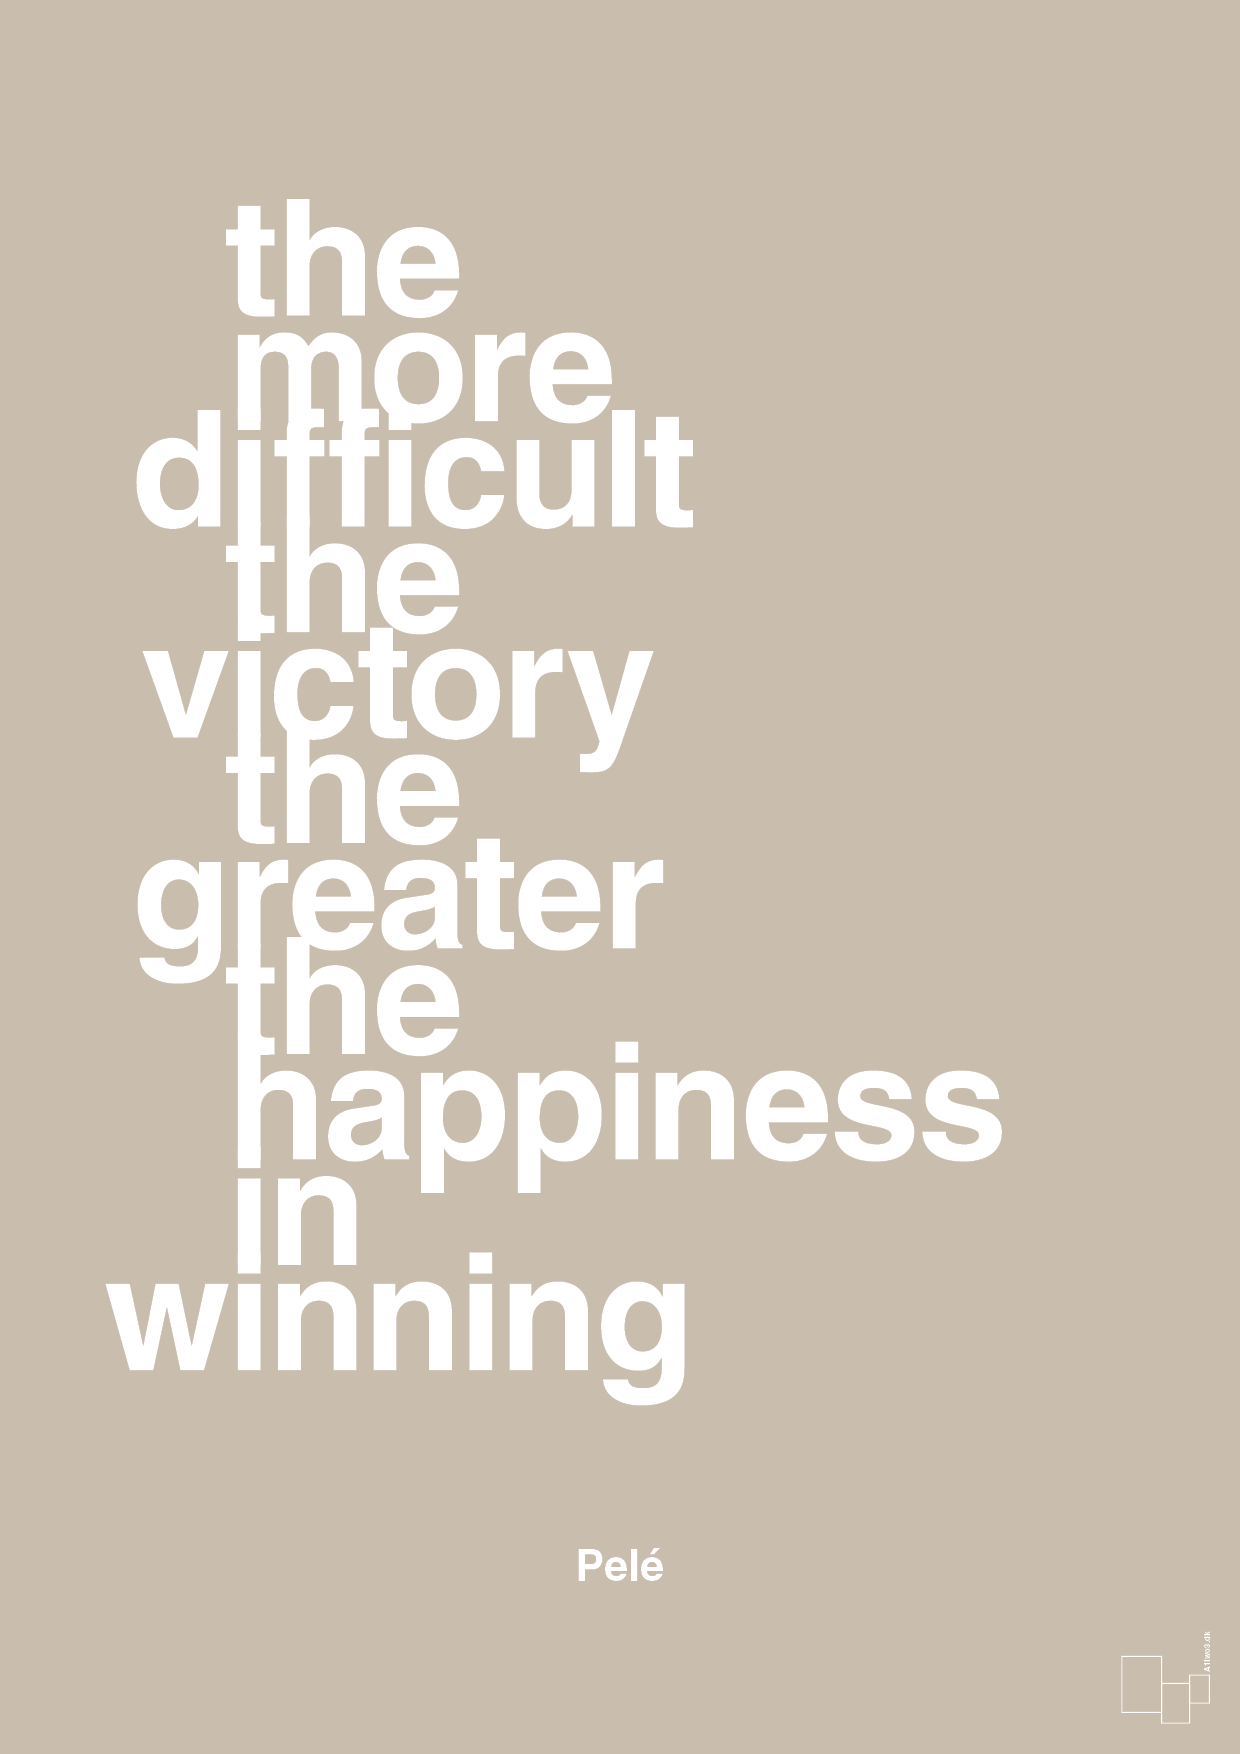 the more difficult the victory the greater the happiness in winning - Plakat med Citater i Creamy Mushroom